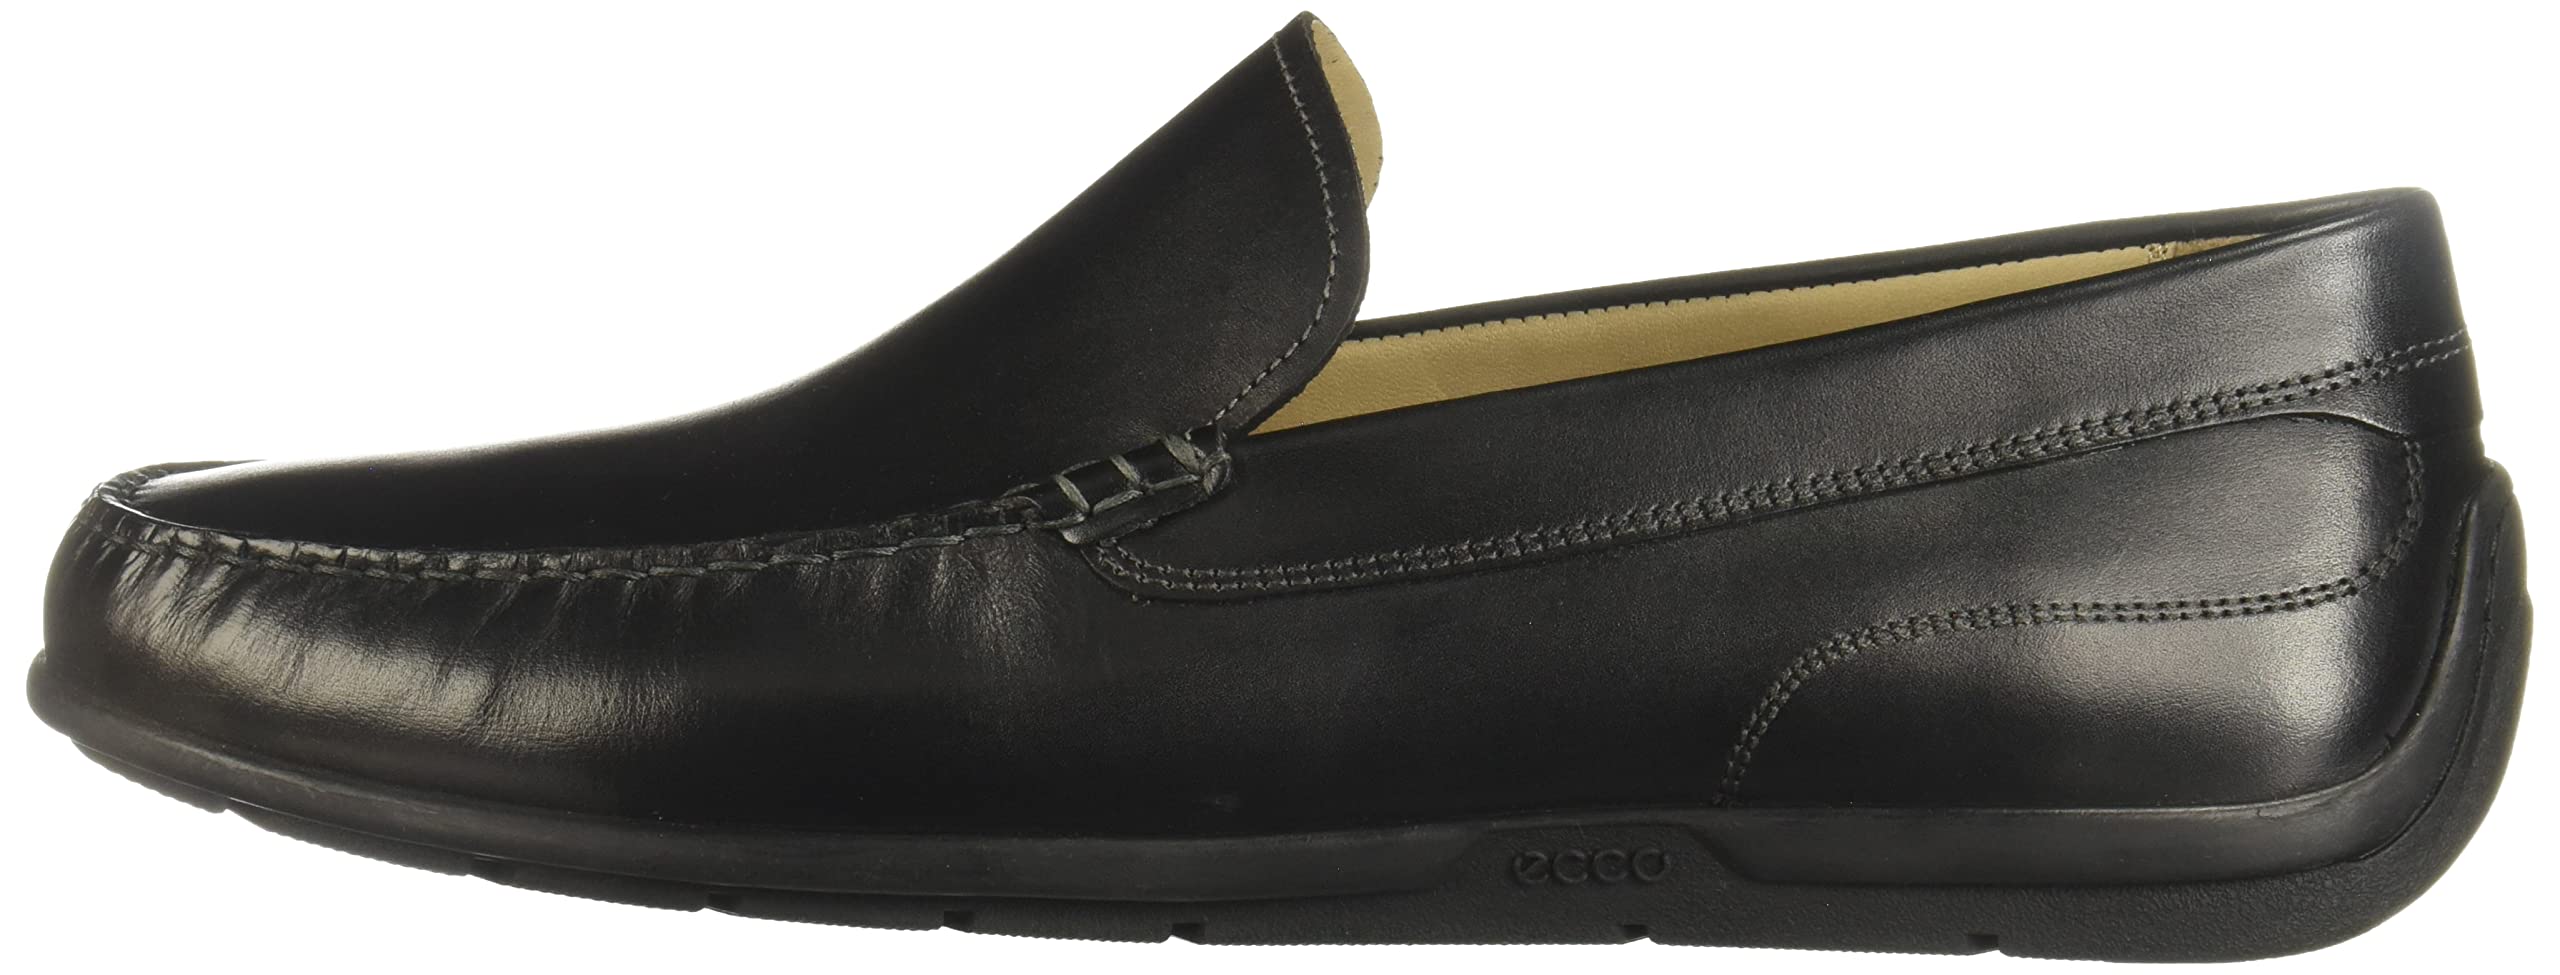 ECCO Men's Classic Moc 2.0 Driving Style Loafer